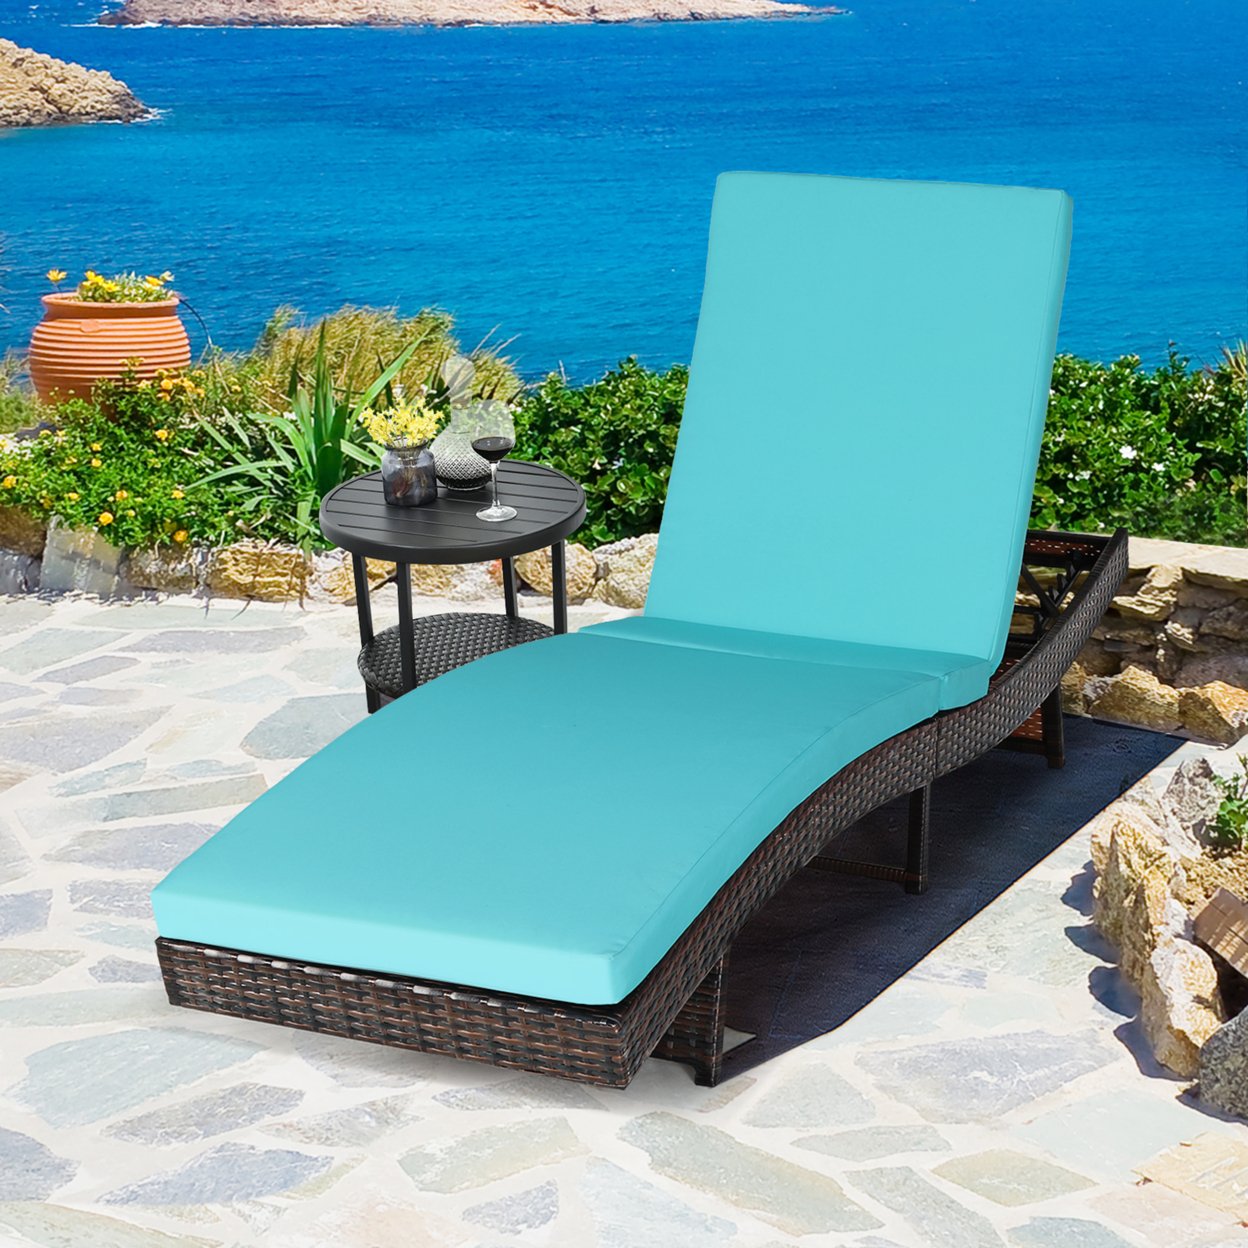 Foldable Patio Rattan Chaise Lounge Chair W/5 Back Positions Turquoise Cushion